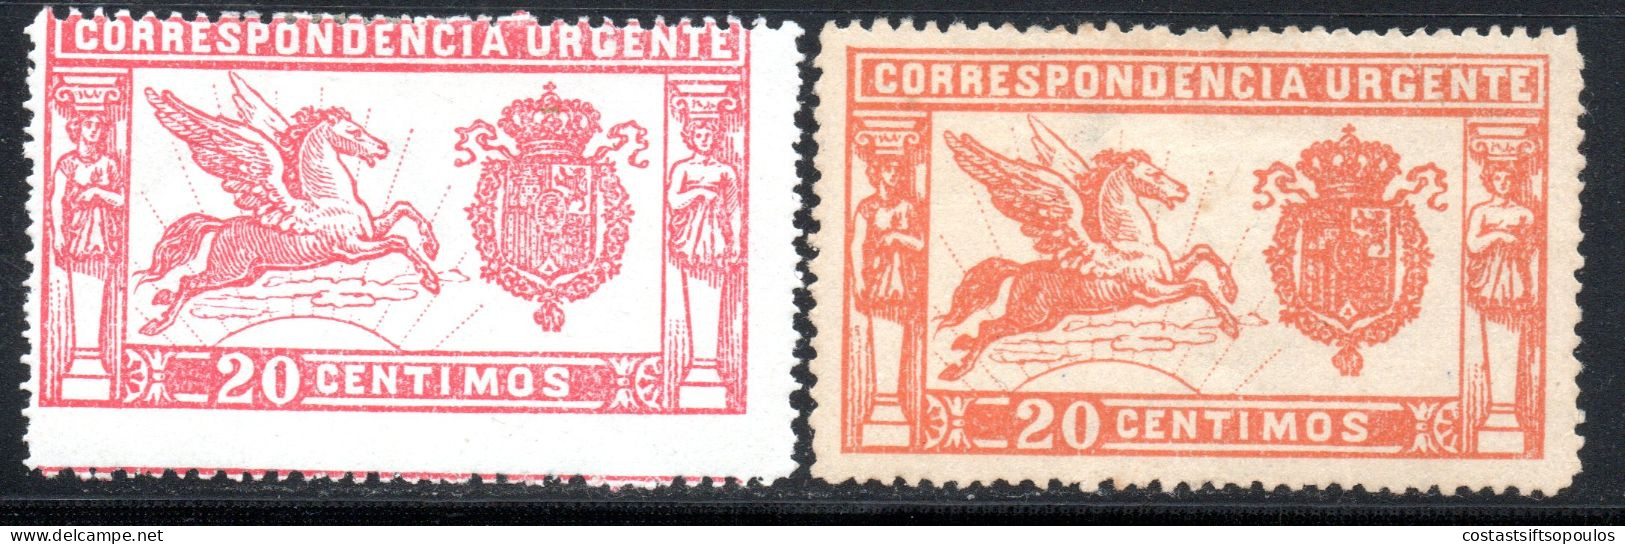 2155. SPAIN 1905-1925 SPECIAL DELIVERY #1 PEGASUS X 2, SHADES, MH. - Special Delivery